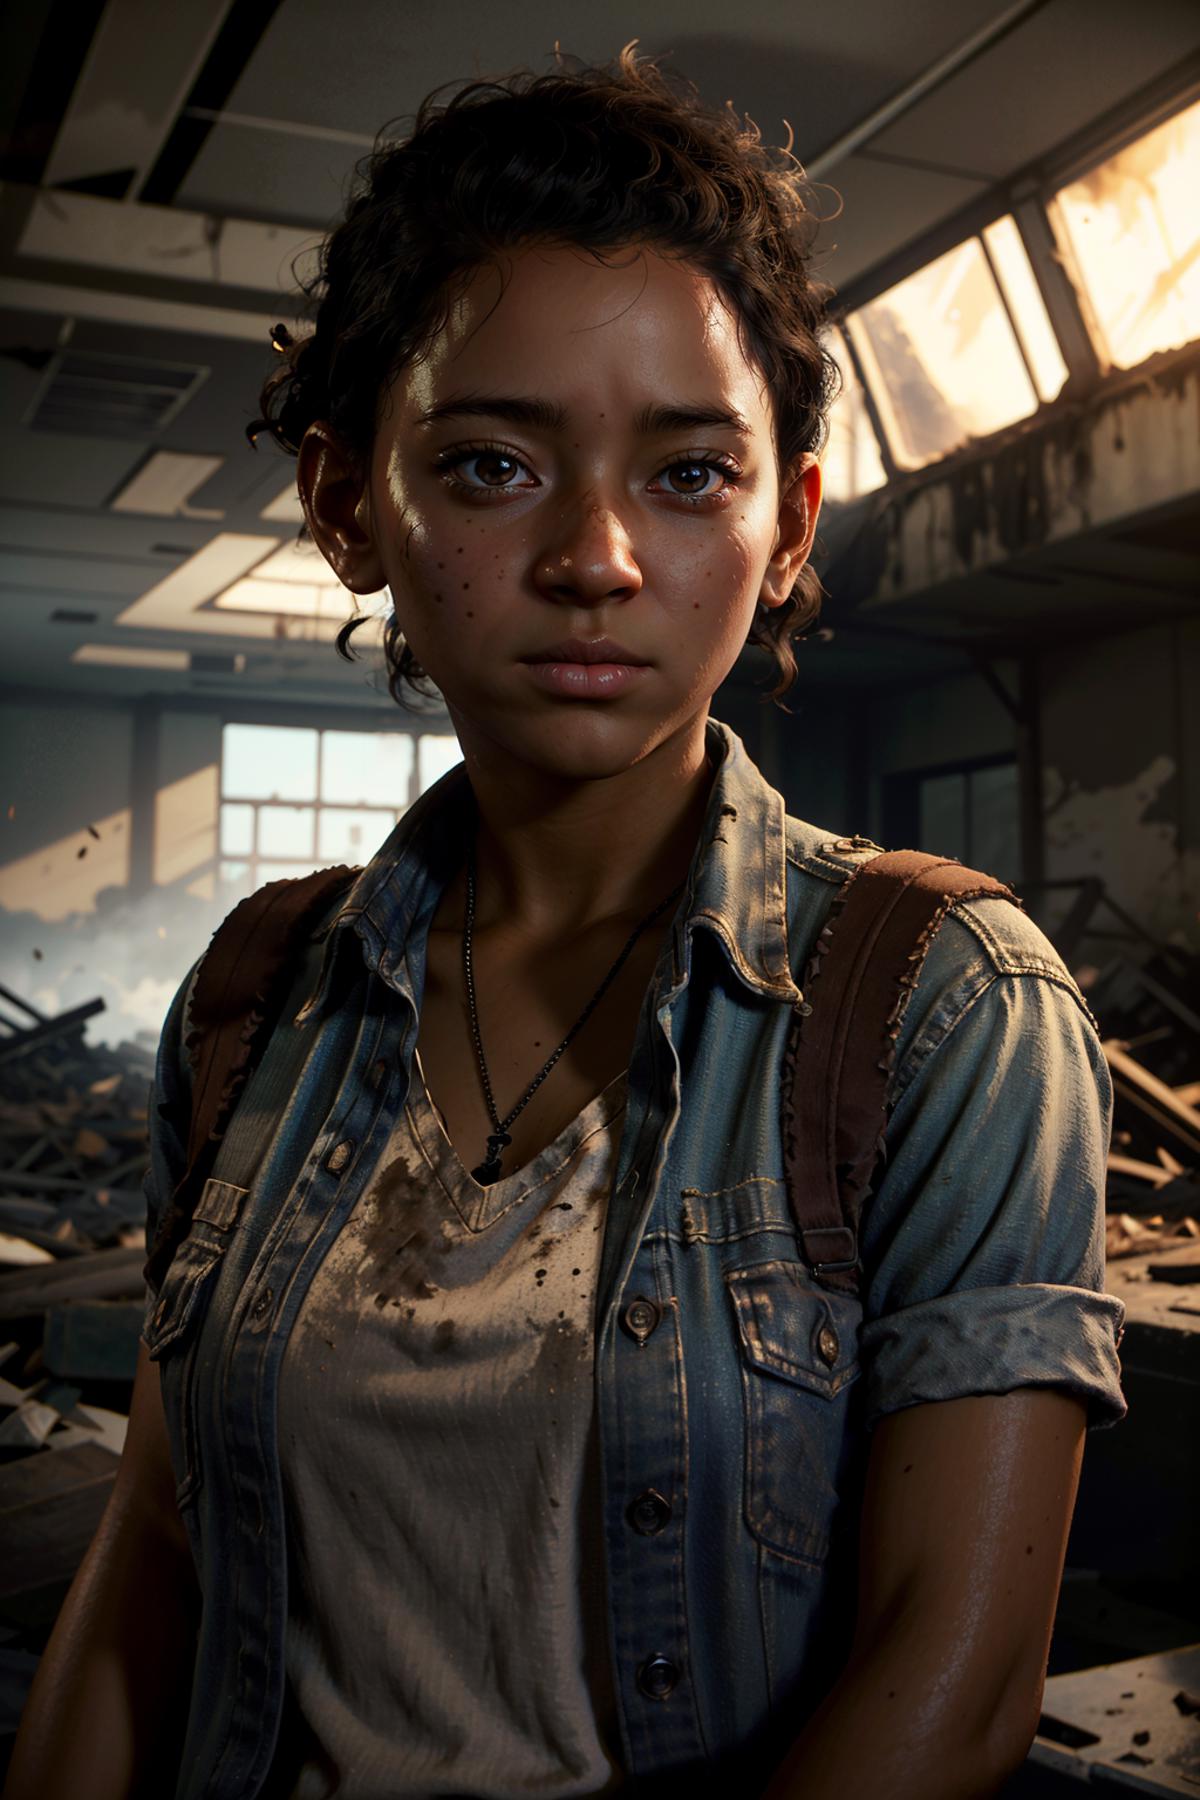 Riley from The Last of Us image by BloodRedKittie